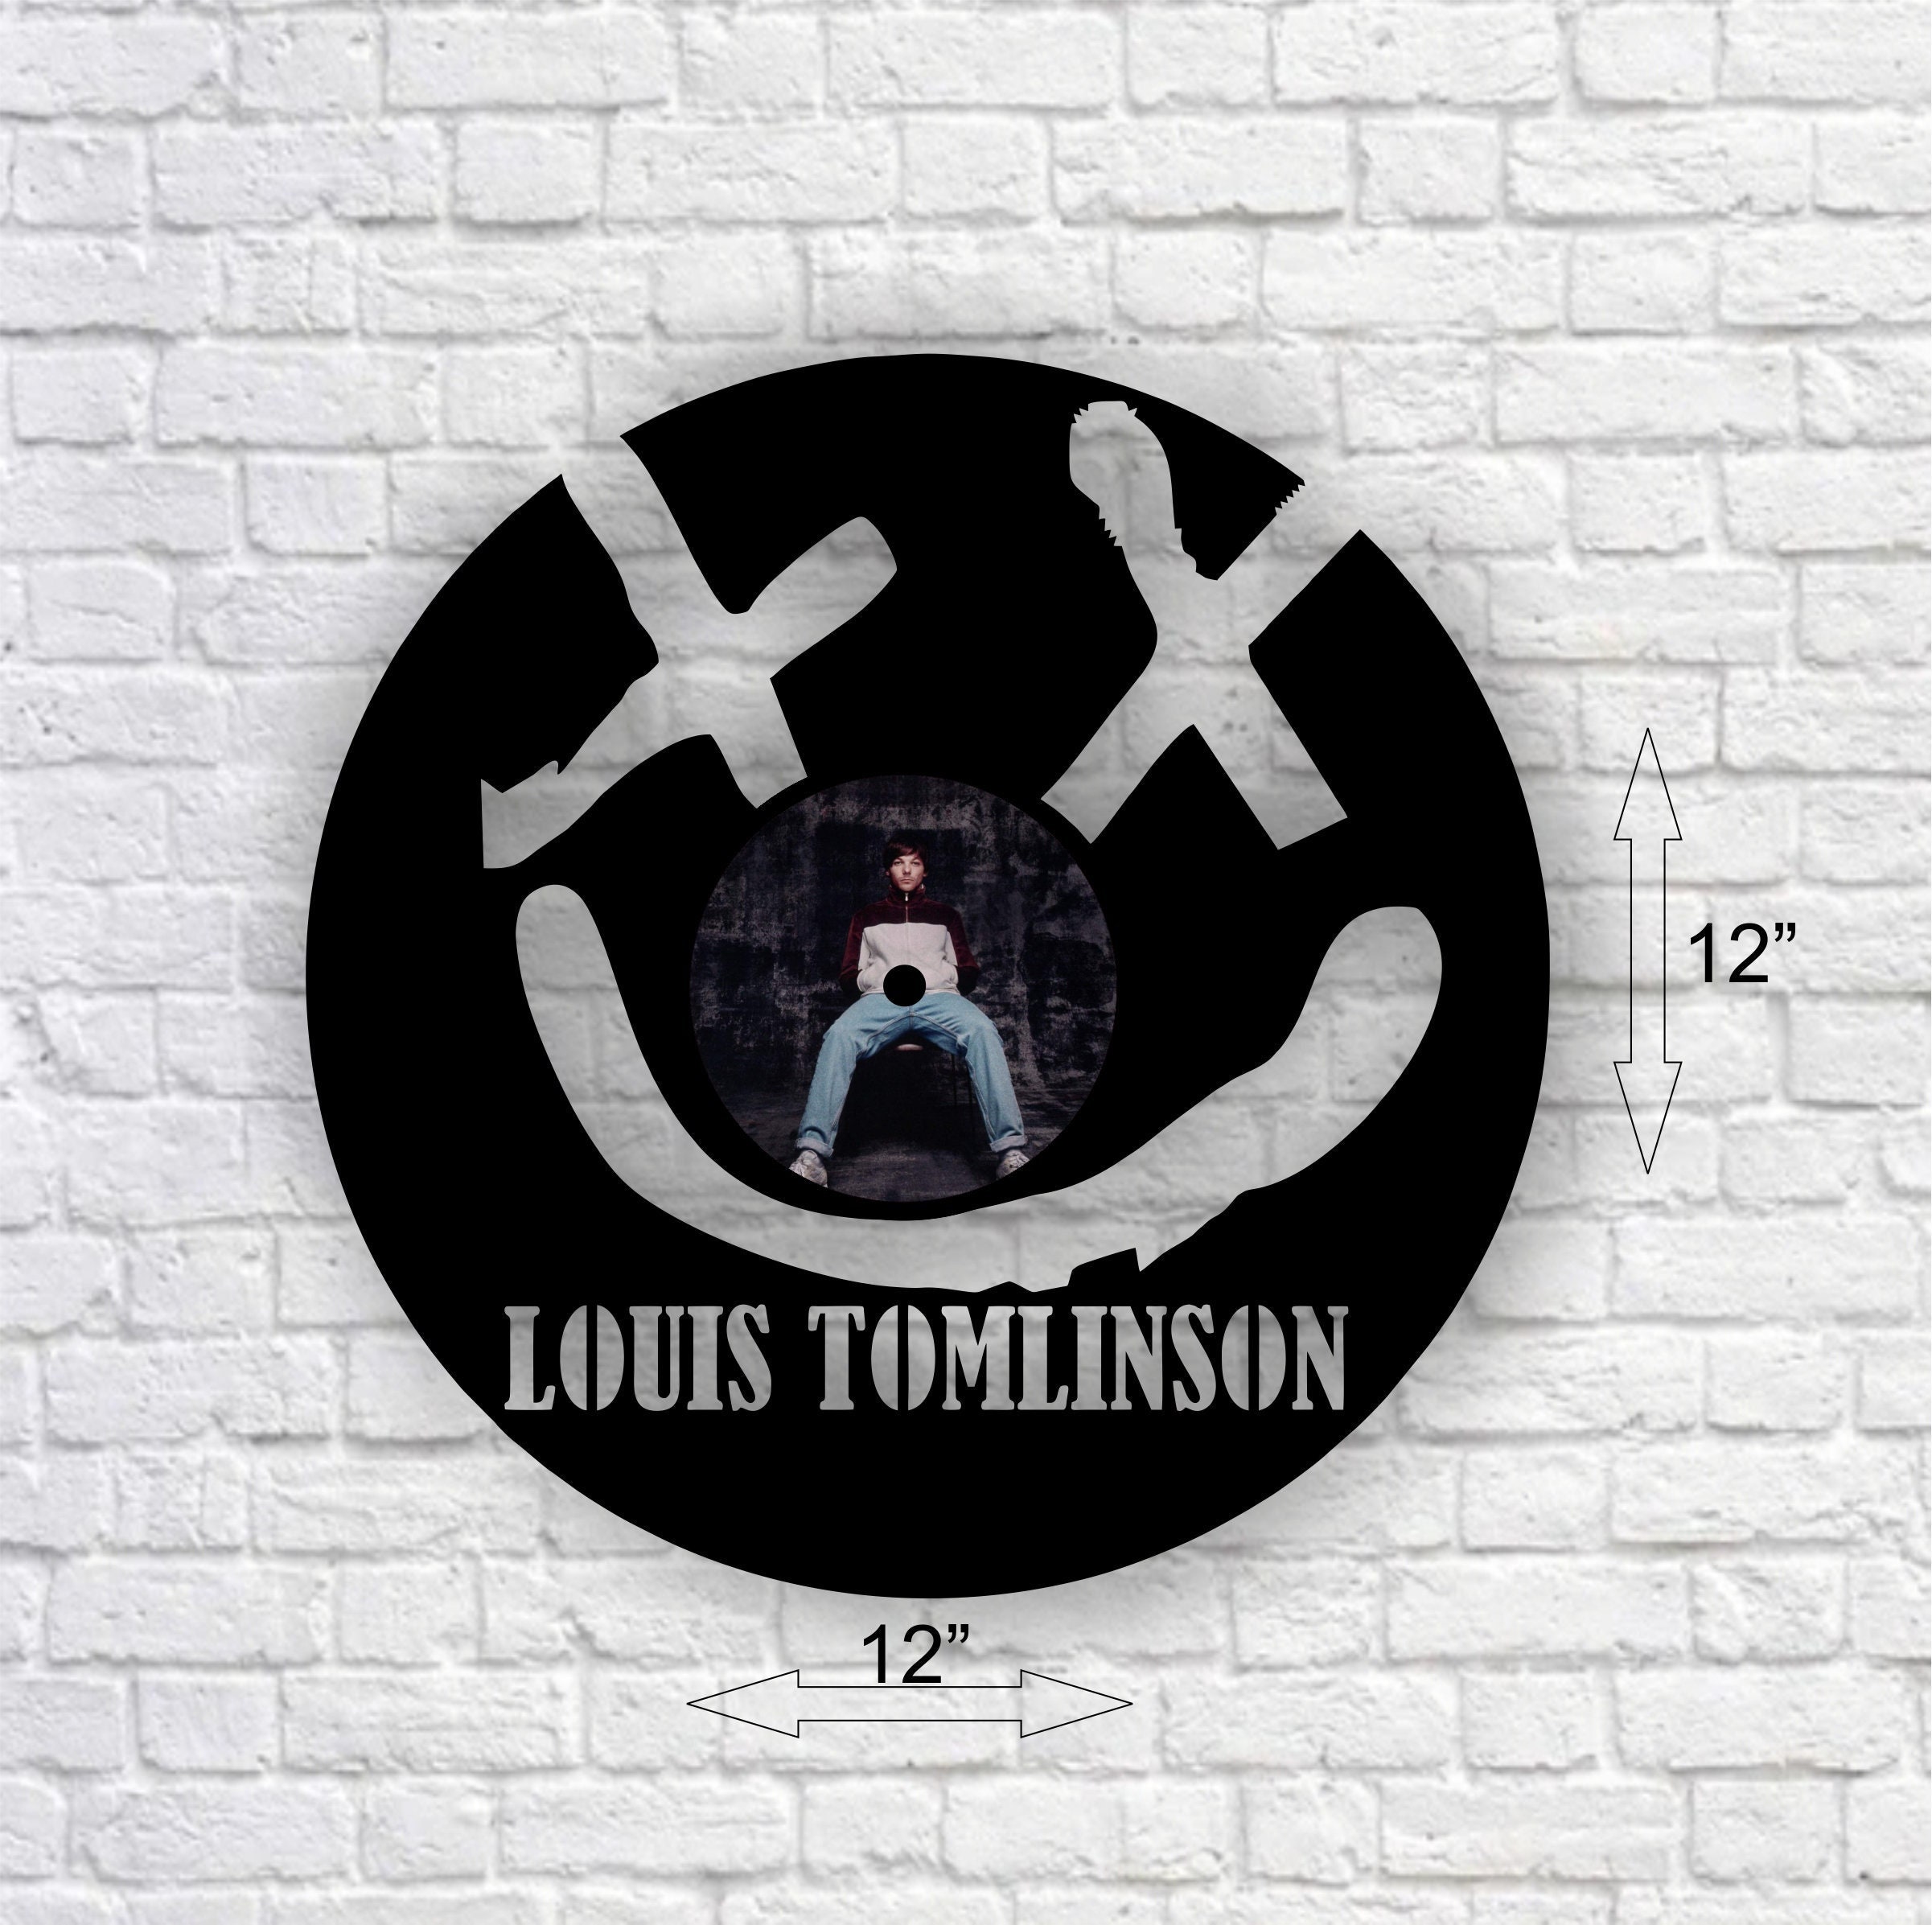  Louis Tomlinson Wall Art Canvas Prints Poster For Home Office  Living Room Decorations Unframed 20x12 : Everything Else